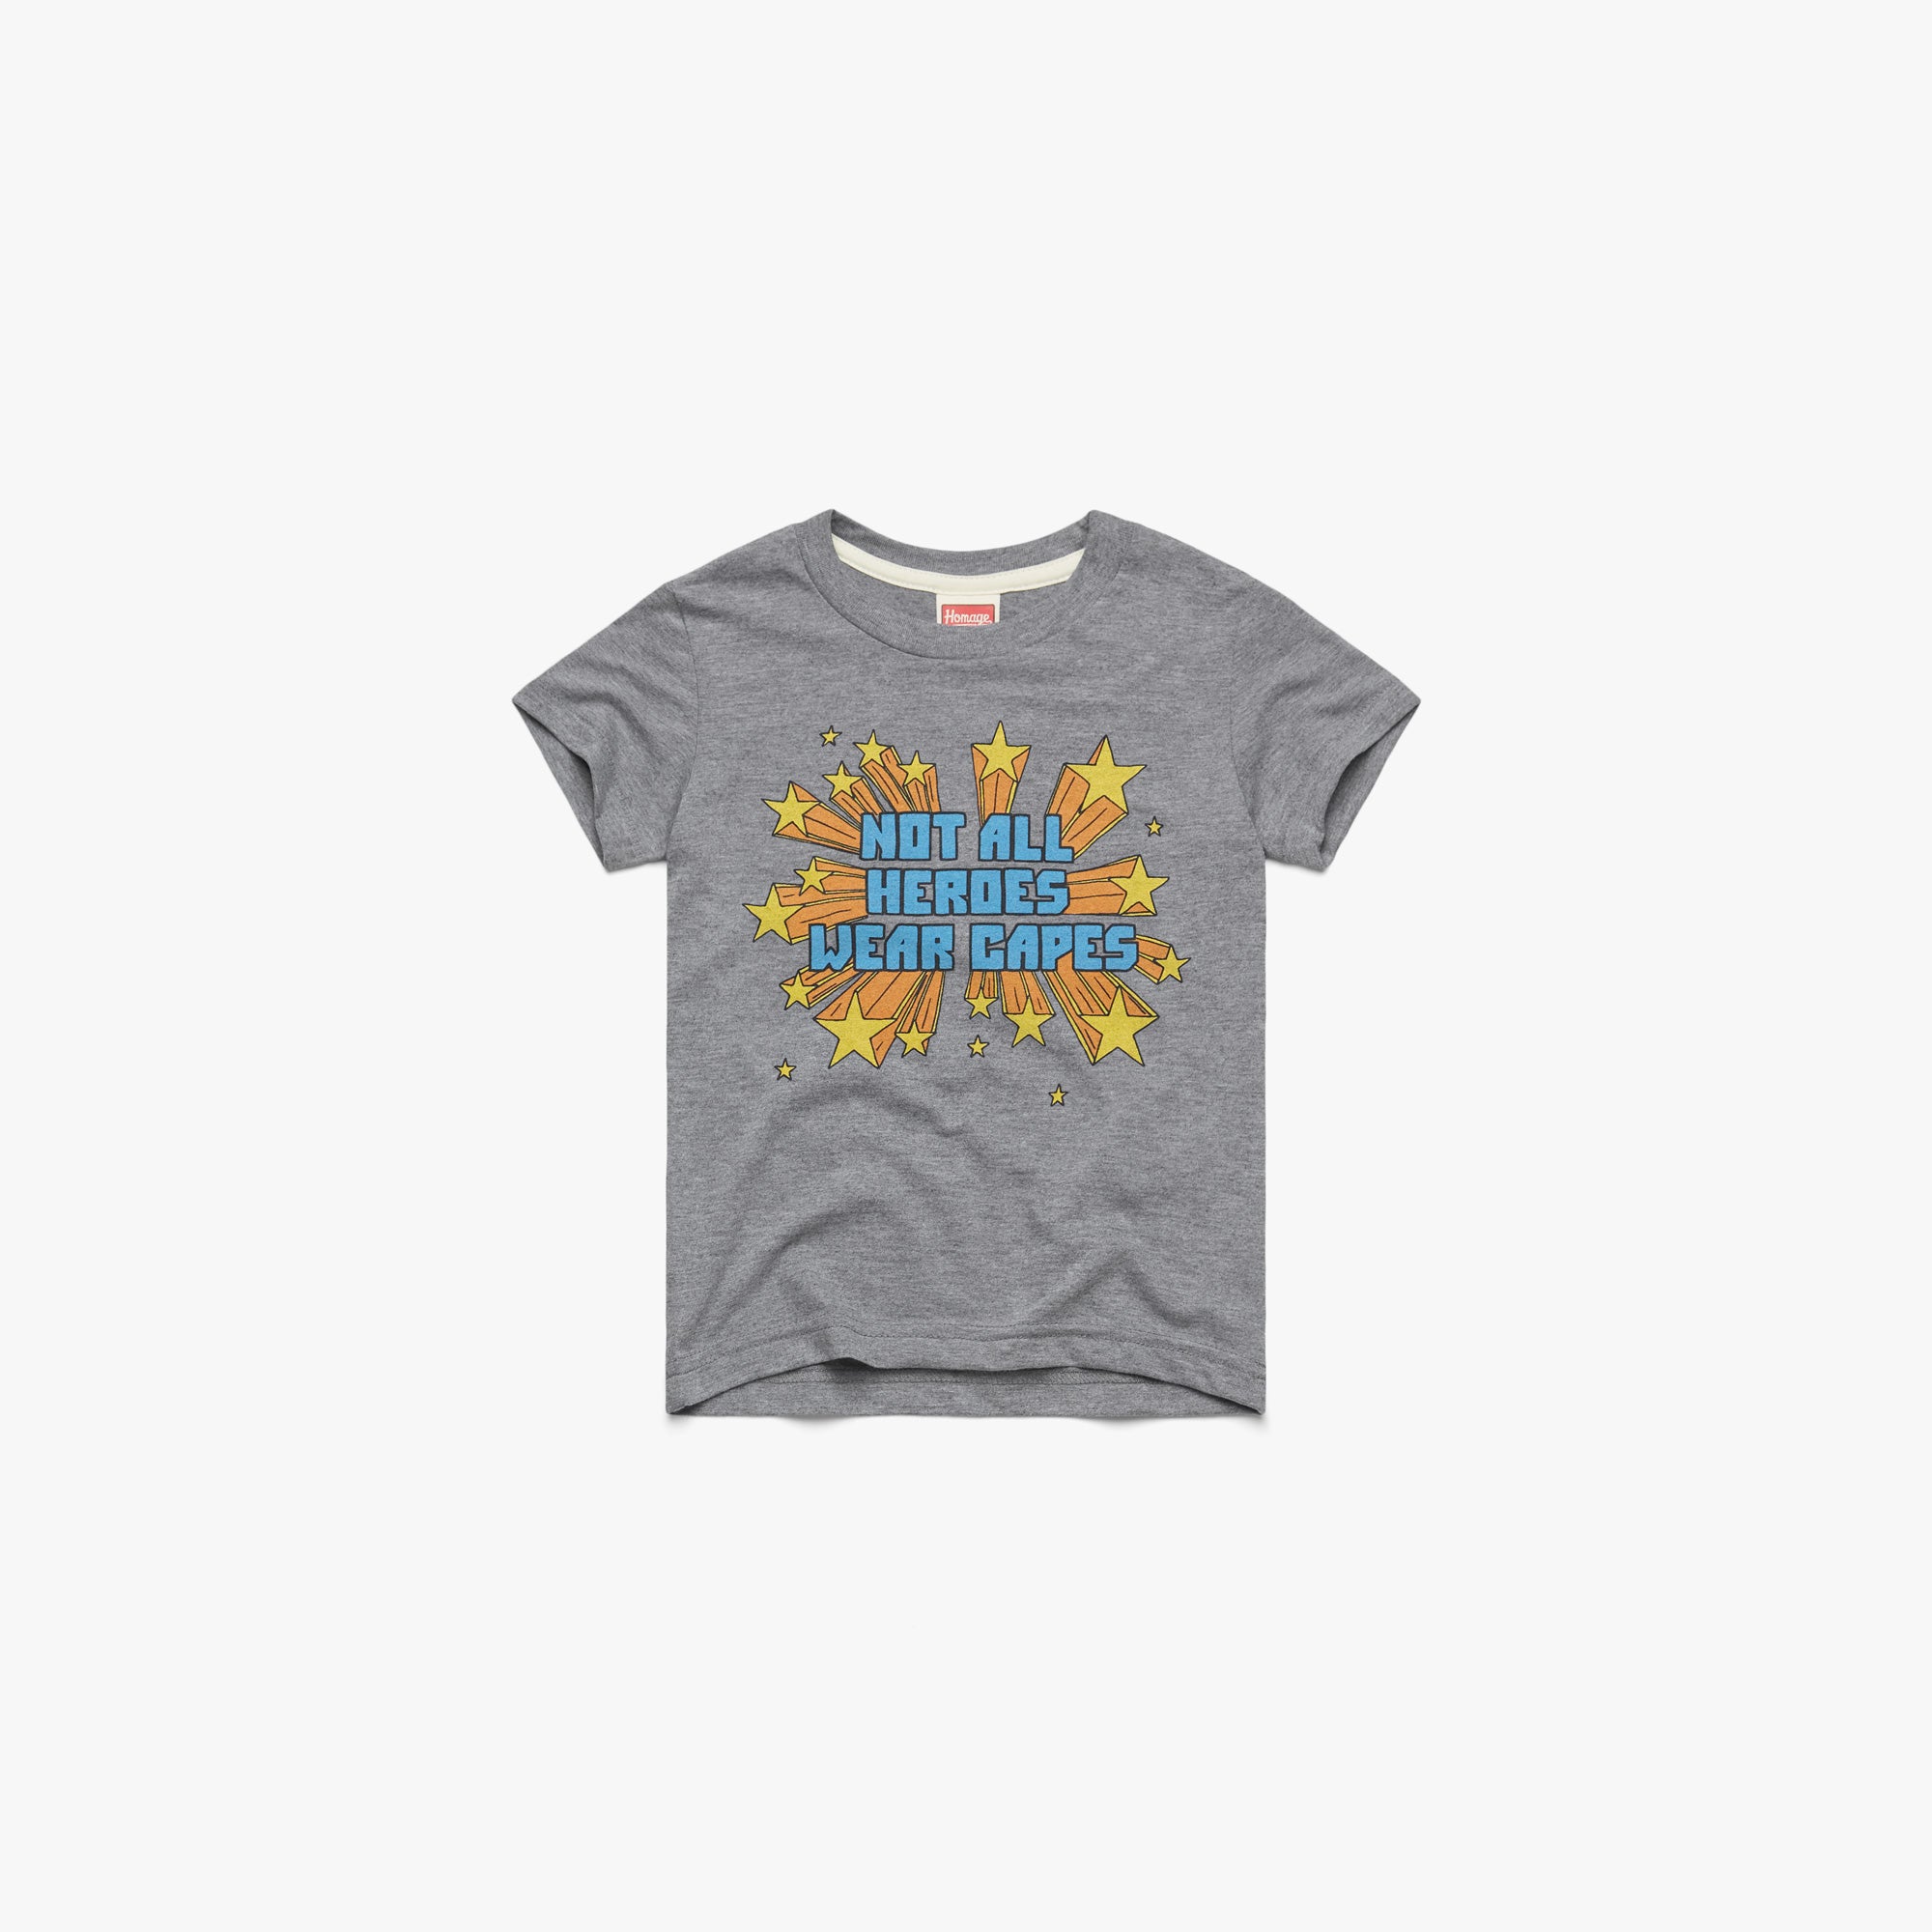 Not All Heroes Wear Capes T-Shirt from Homage. | Grey | Vintage Apparel from Homage.